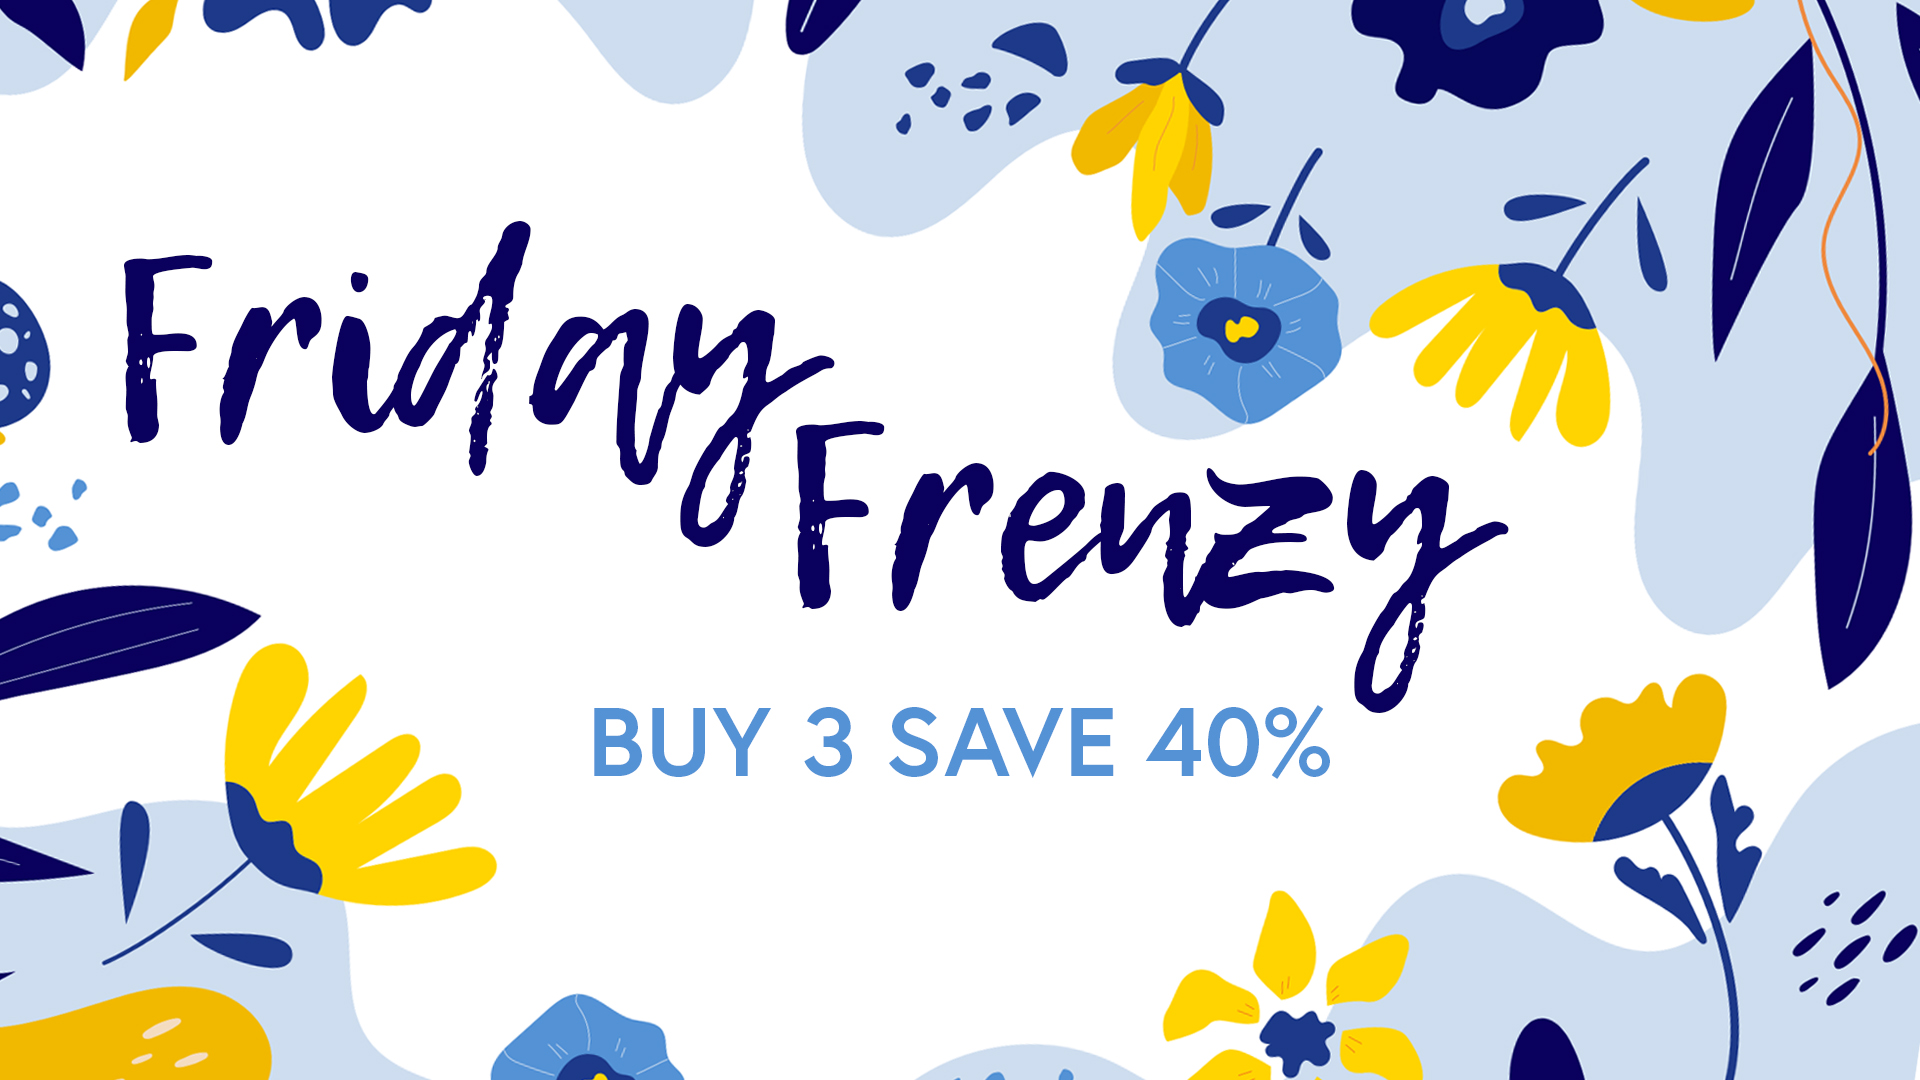 catch-up-with-the-friday-frenzy---buy-3-save-40-on-selected-imala-products-22nd-oct-21